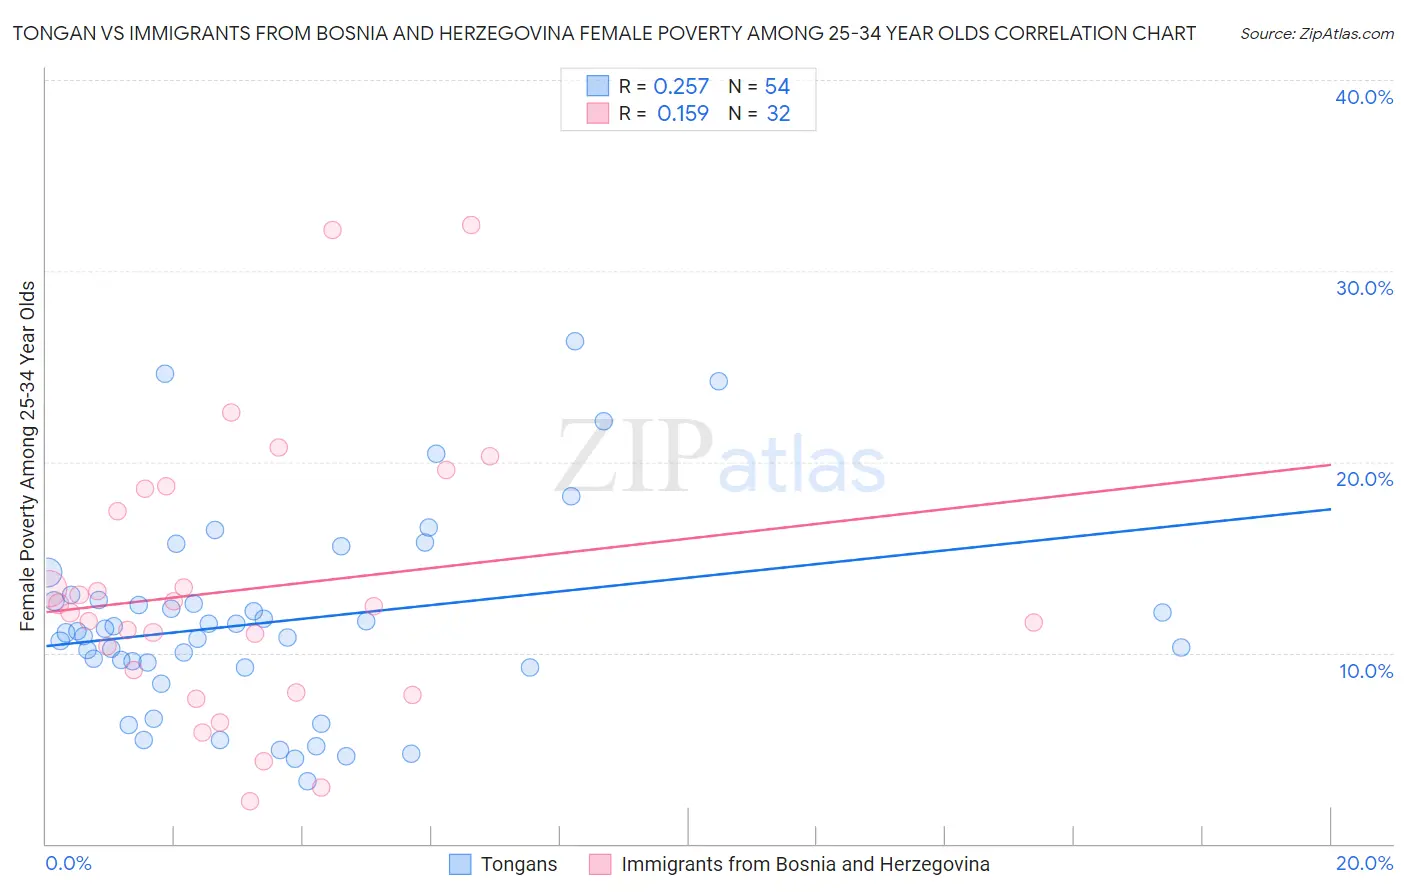 Tongan vs Immigrants from Bosnia and Herzegovina Female Poverty Among 25-34 Year Olds